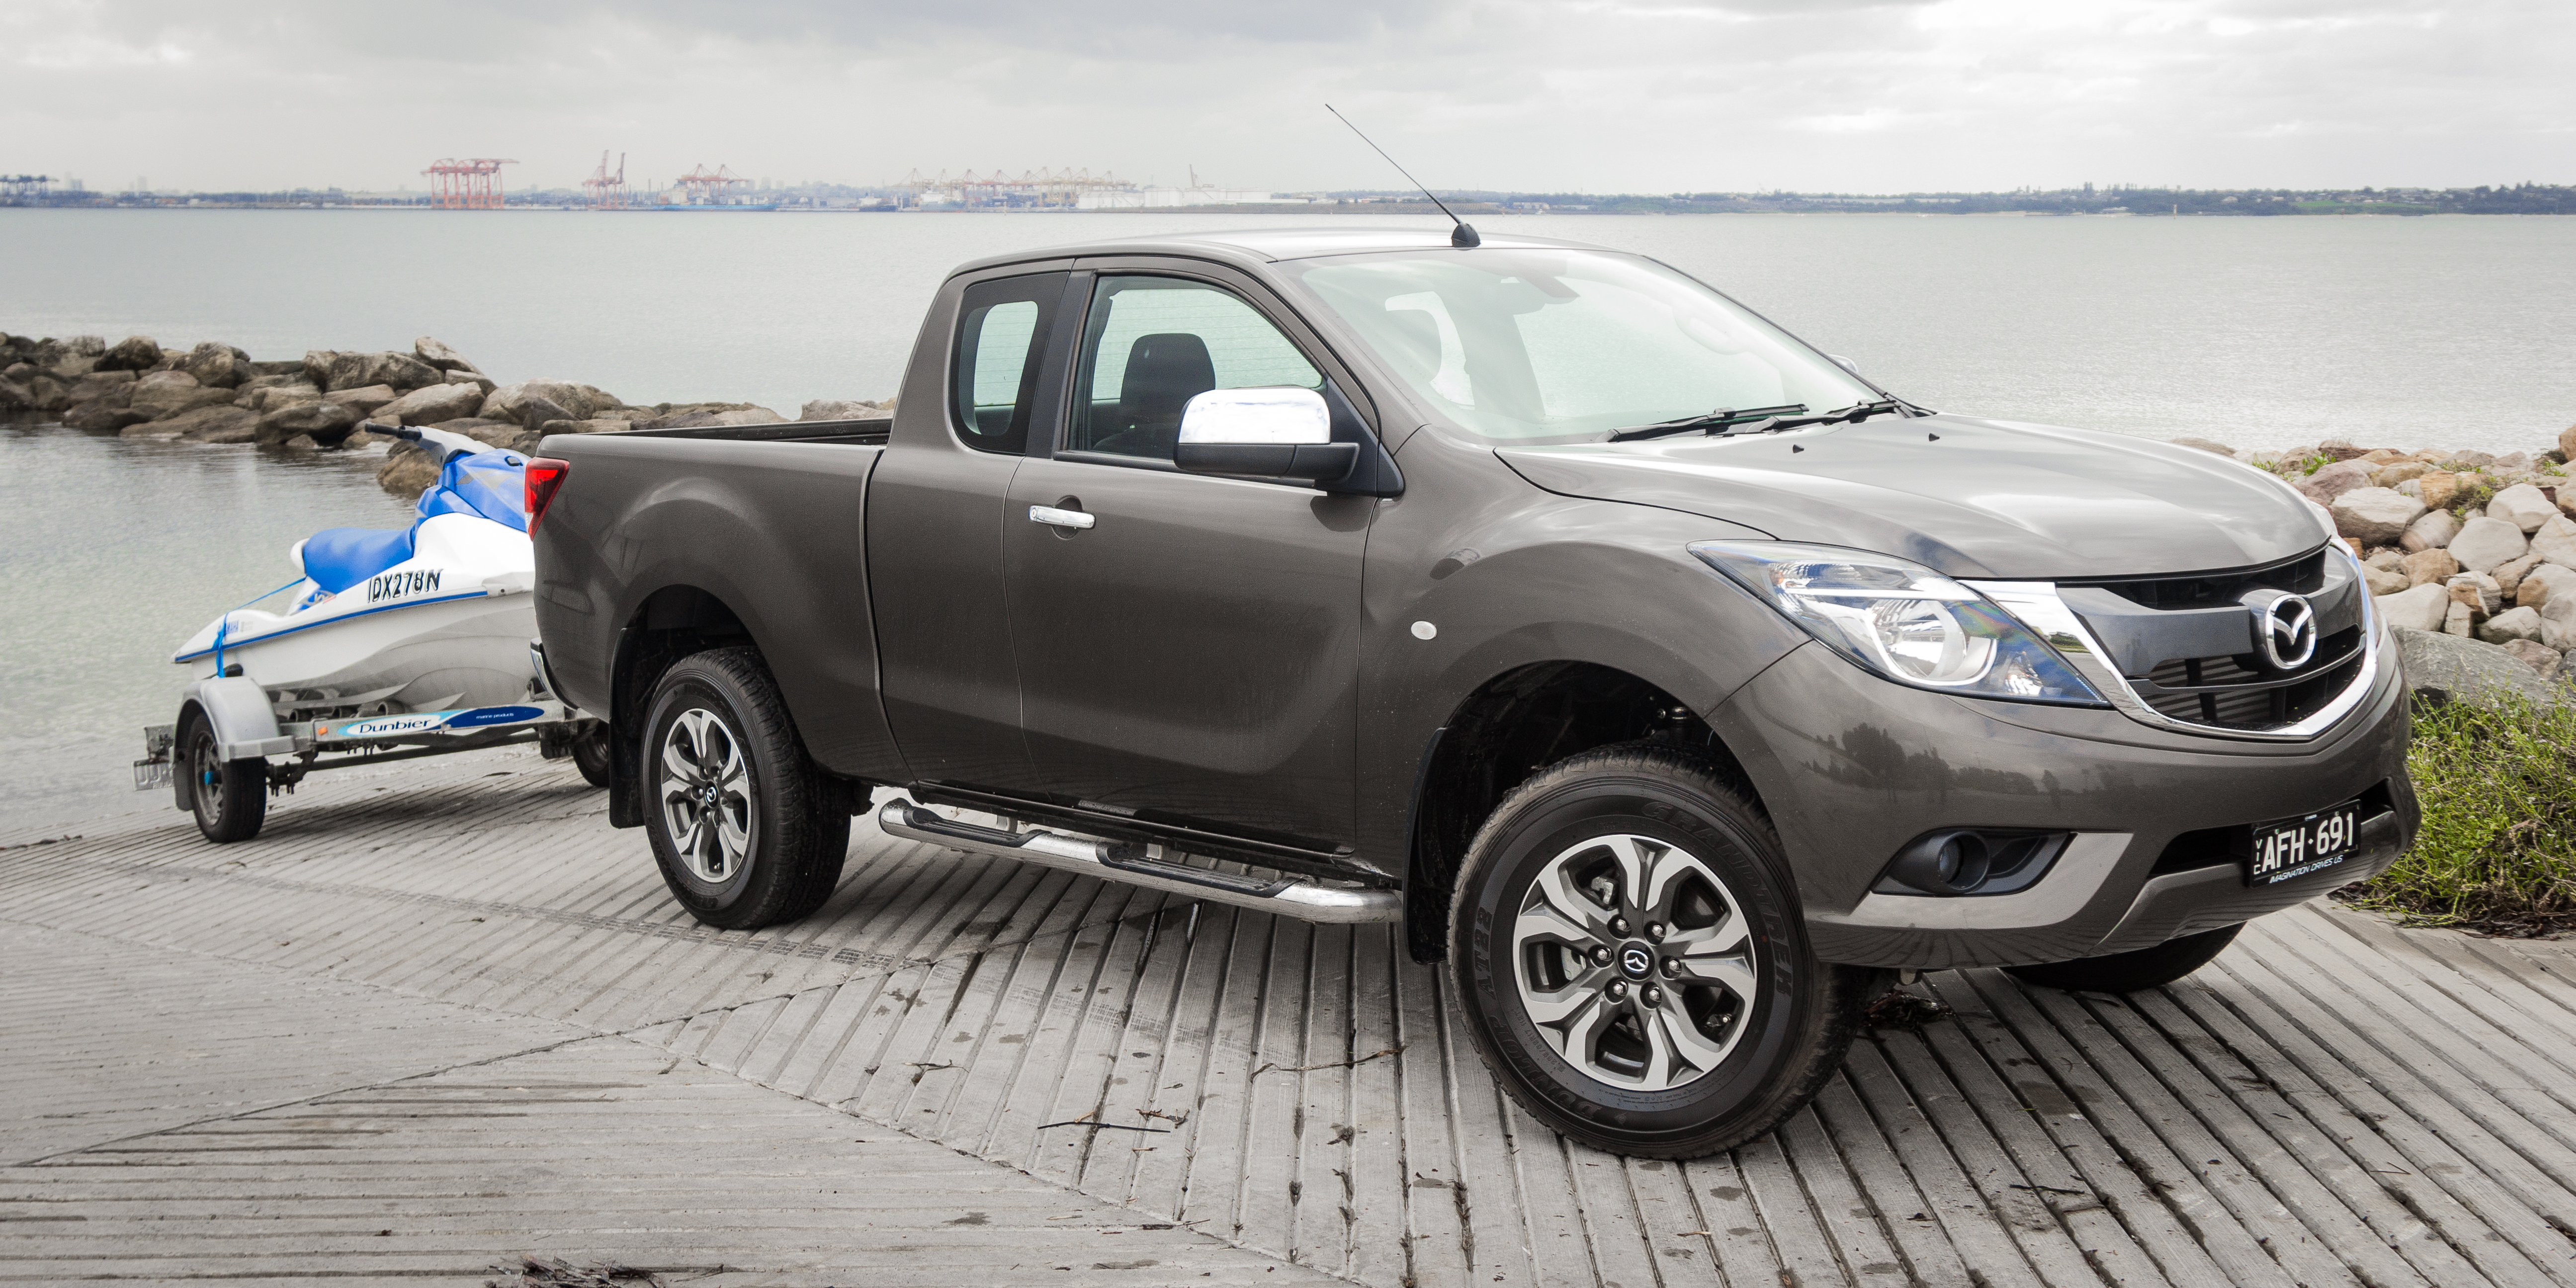 Ford Ranger Extra Cab mod restyling